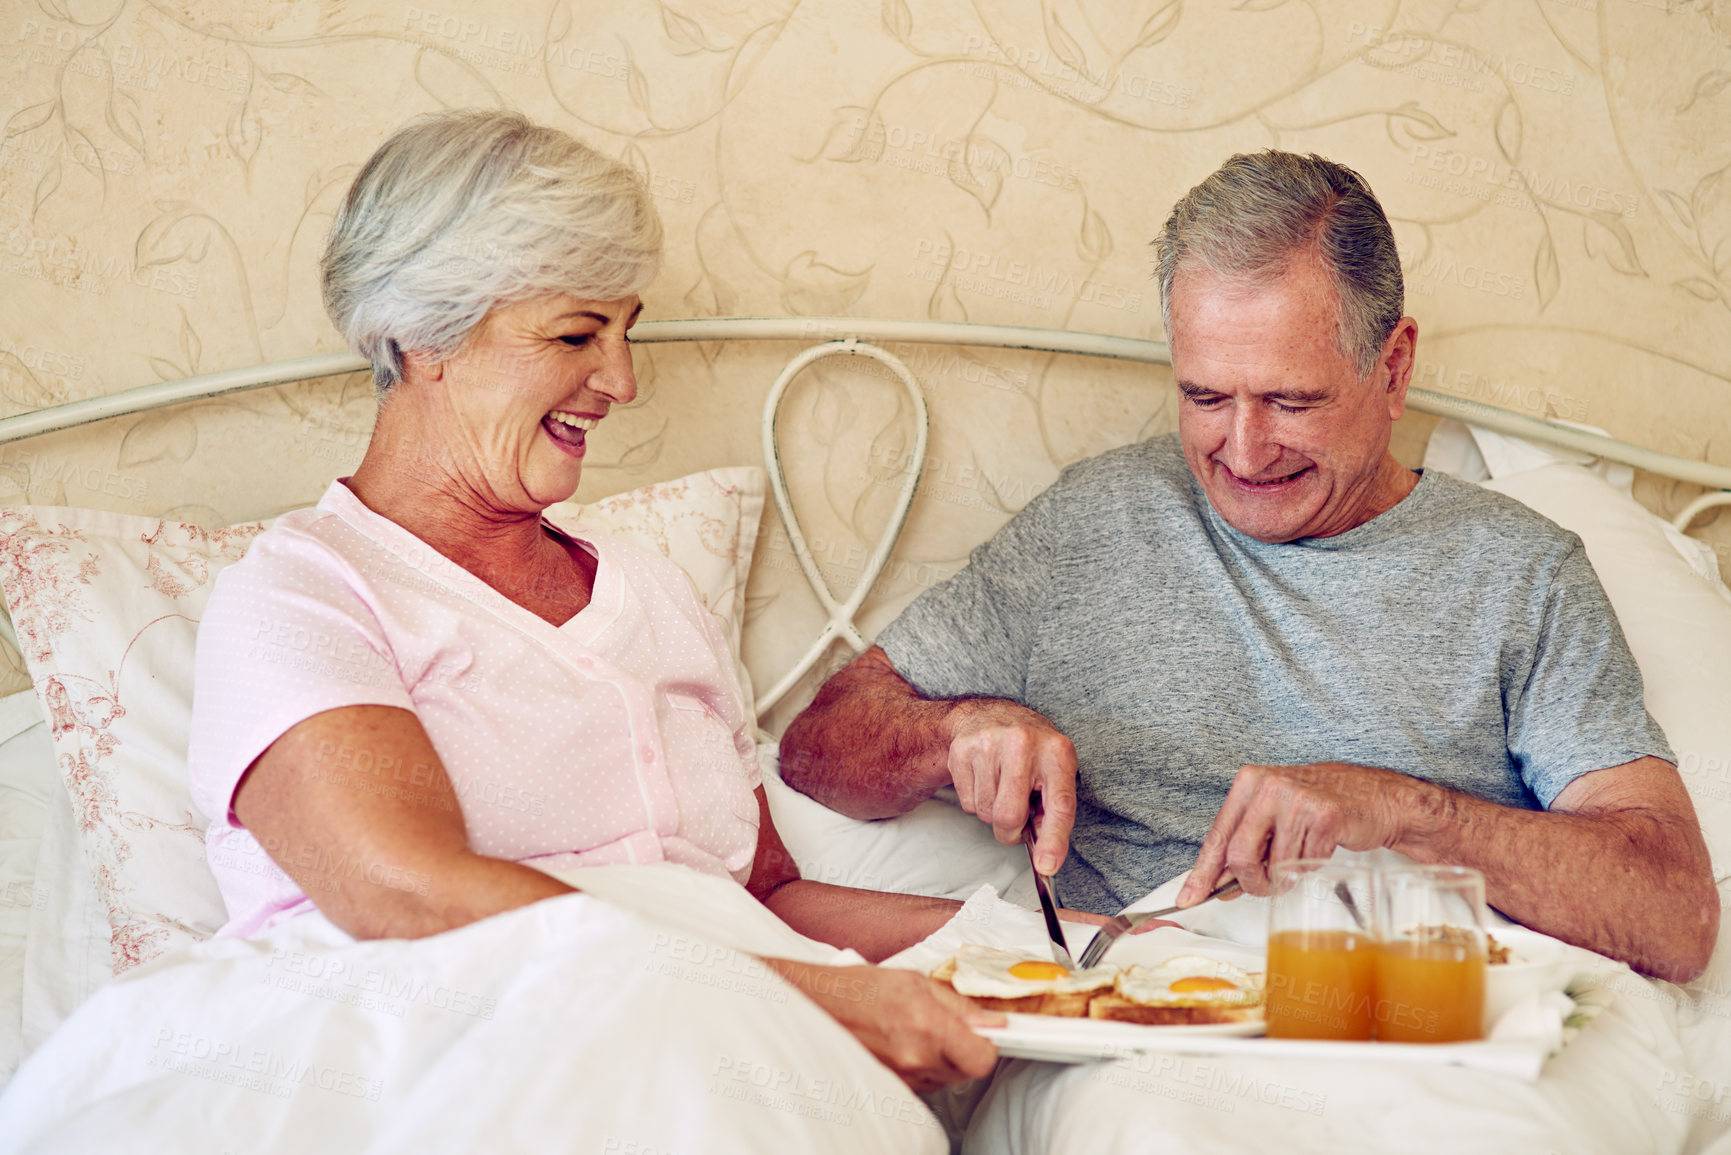 Buy stock photo Cropped shot of a senior couple having breakfast in bed together